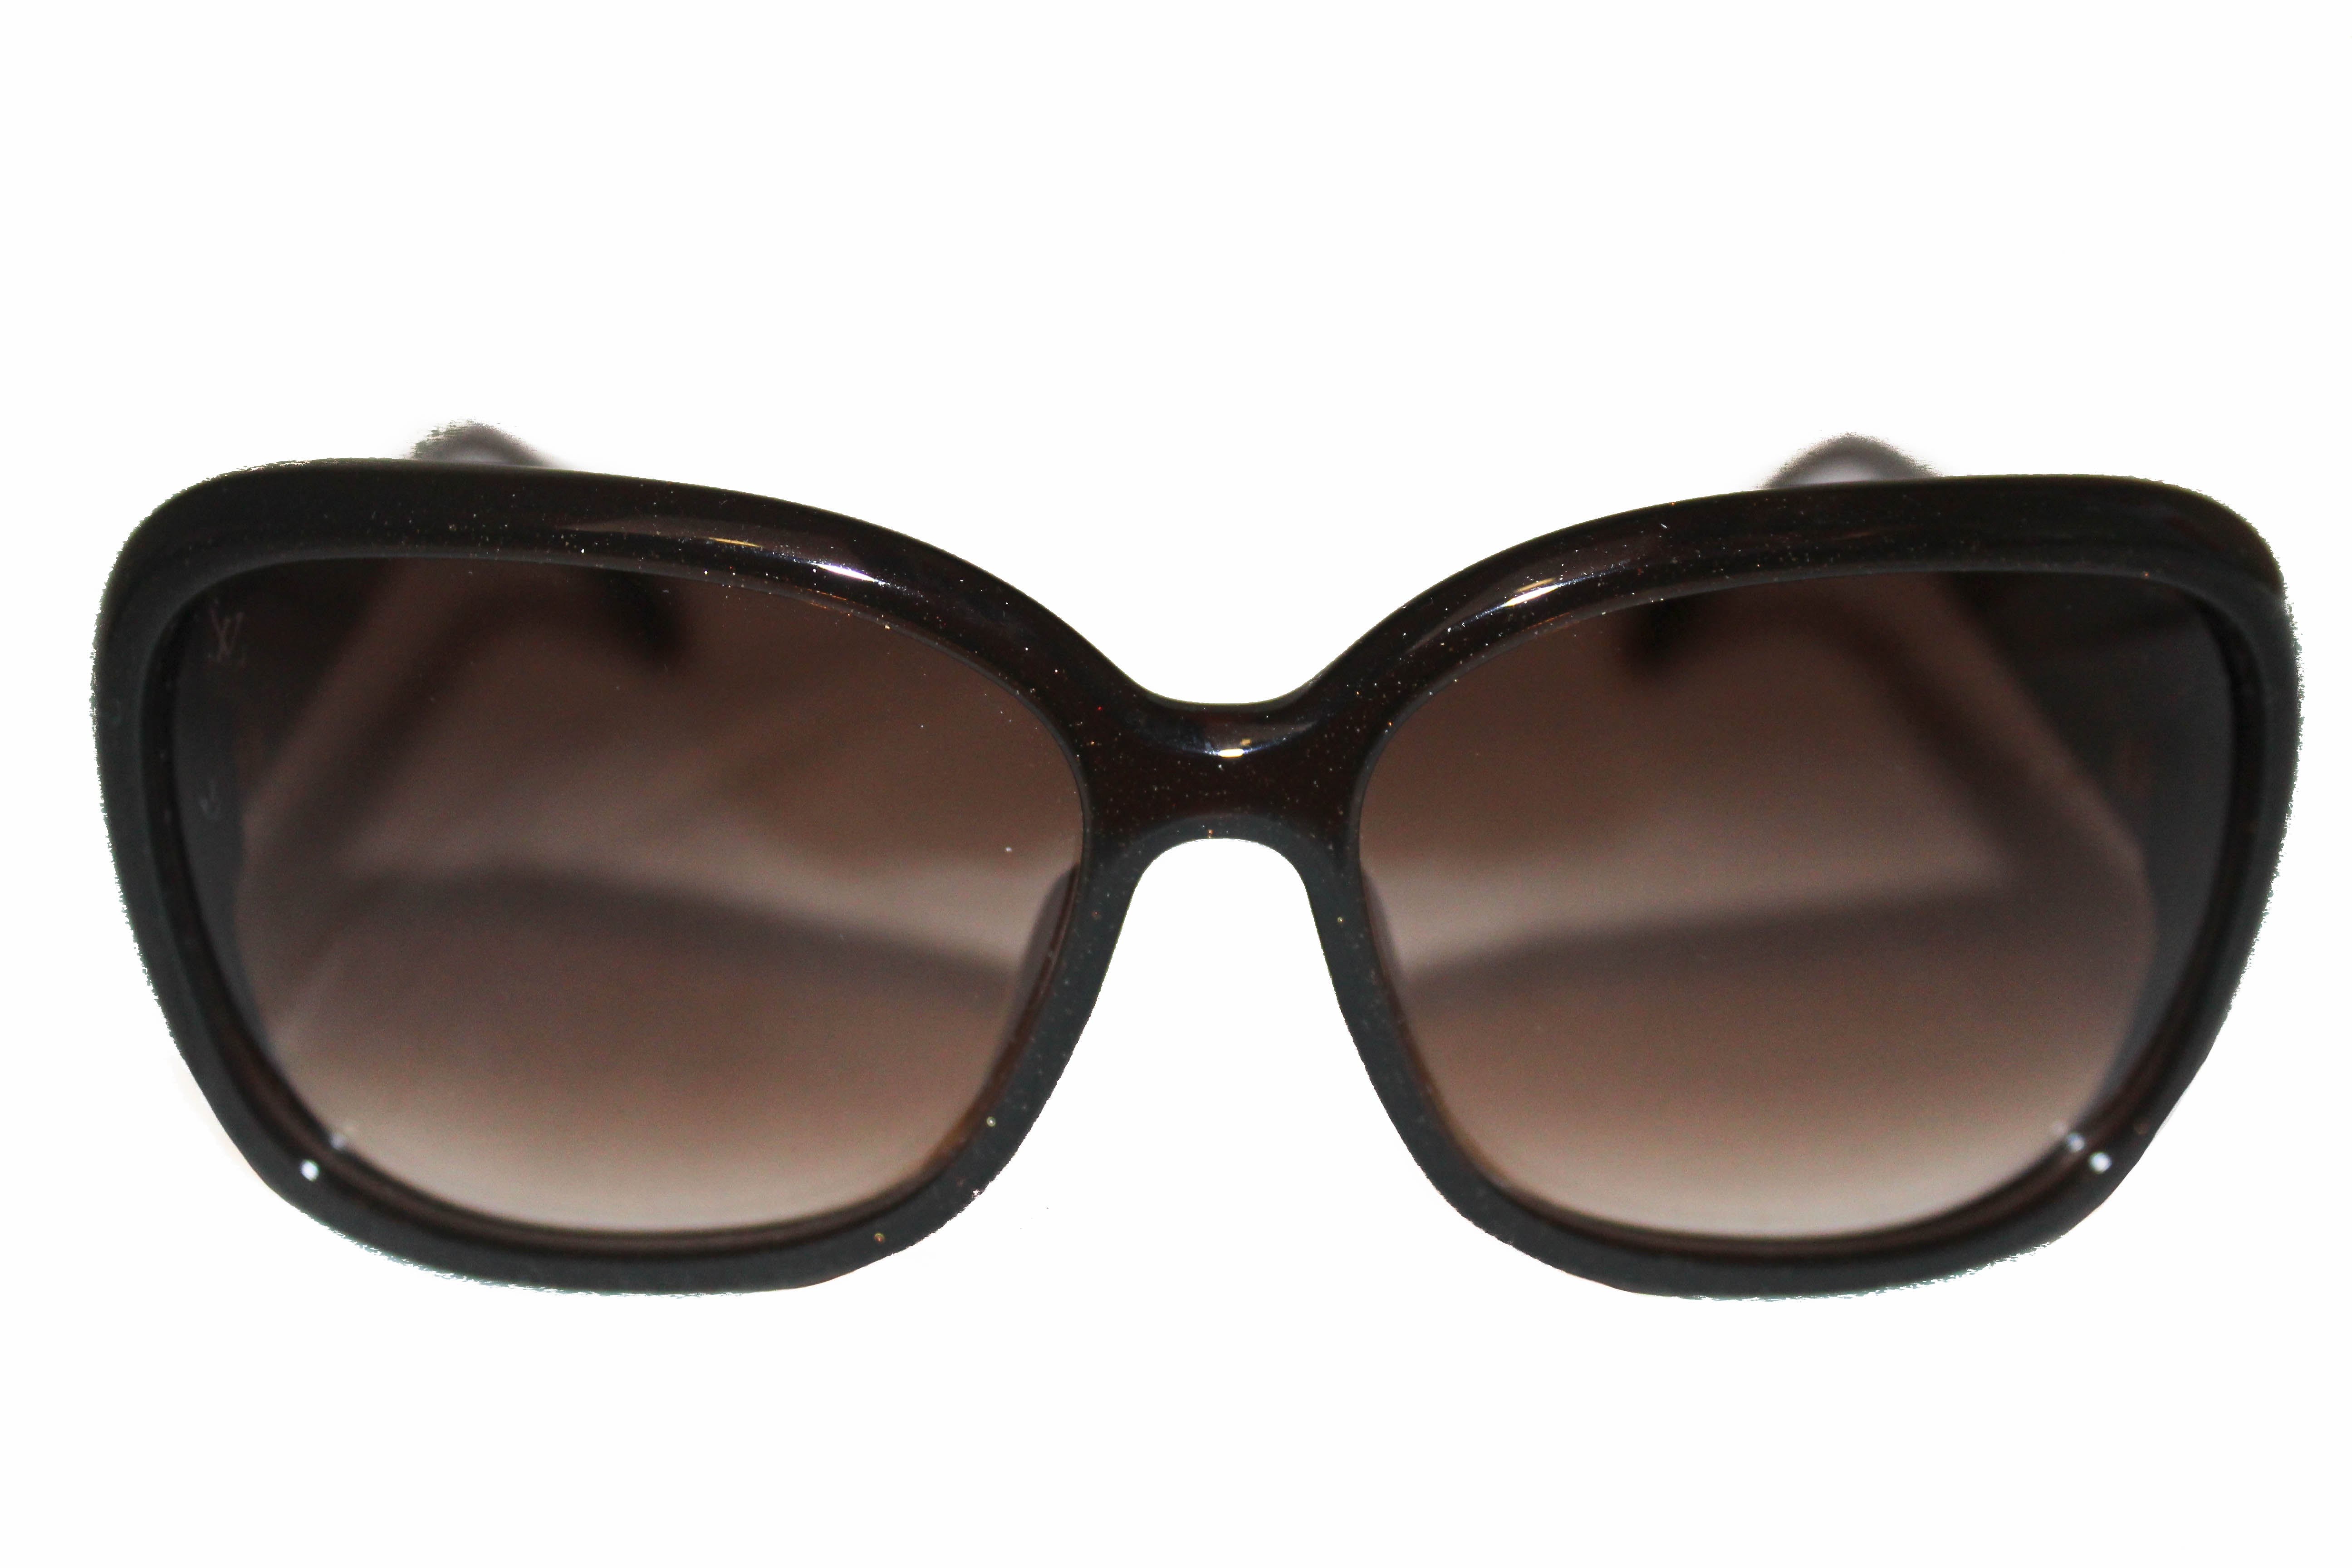 Authentic Louis Vuitton Brown Glitter Obsession Sunglasses